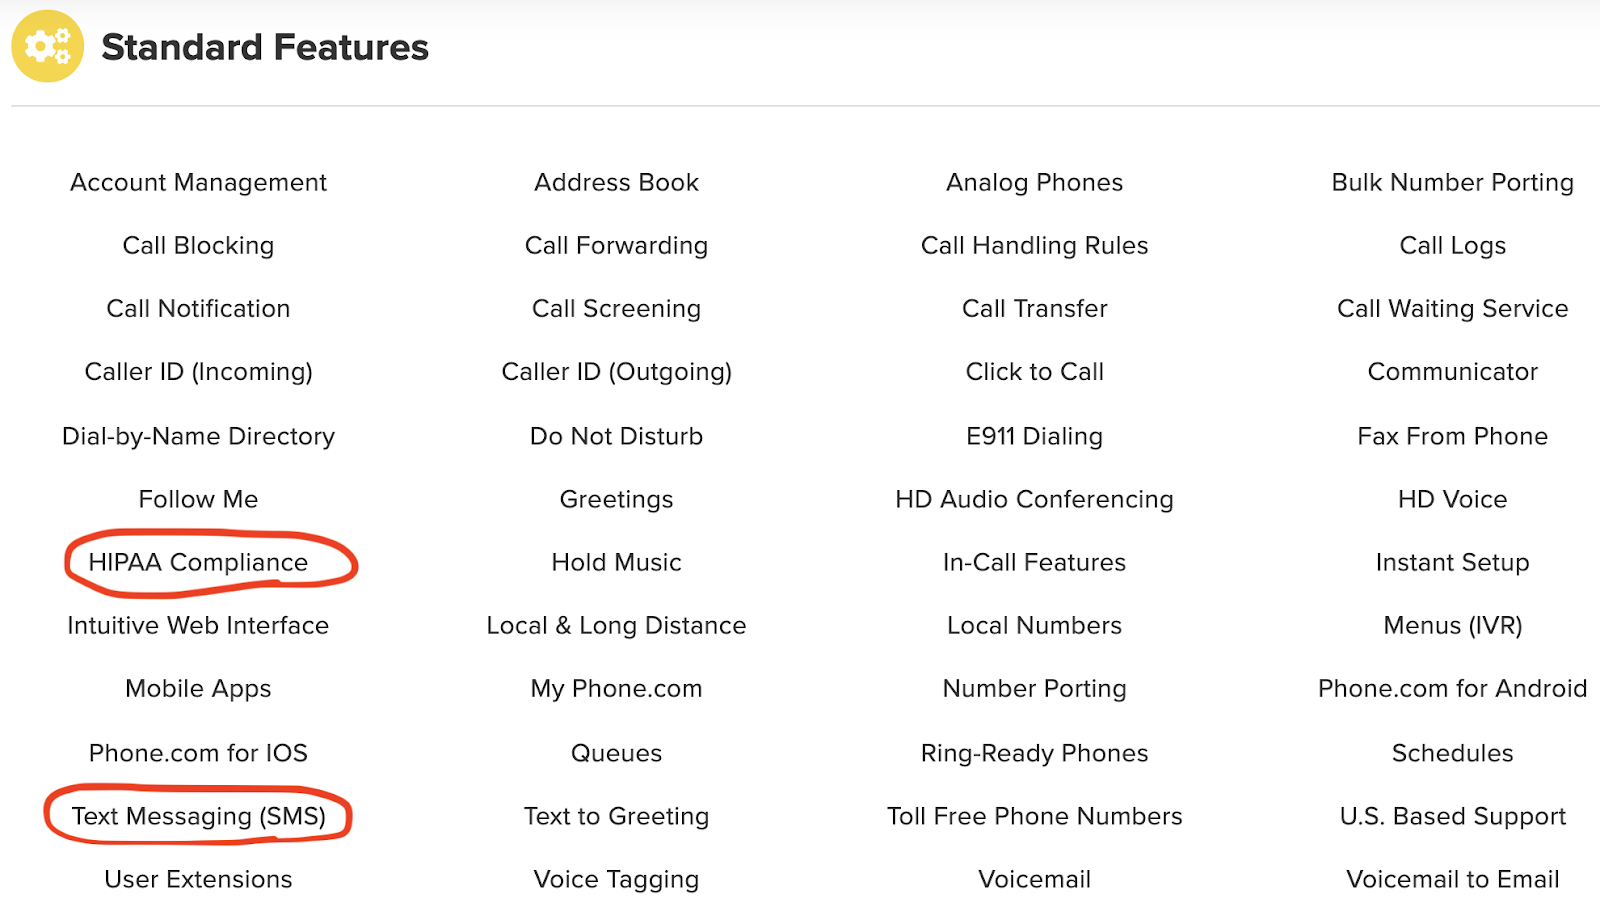 Phone.com 800 Numbers Standard Features